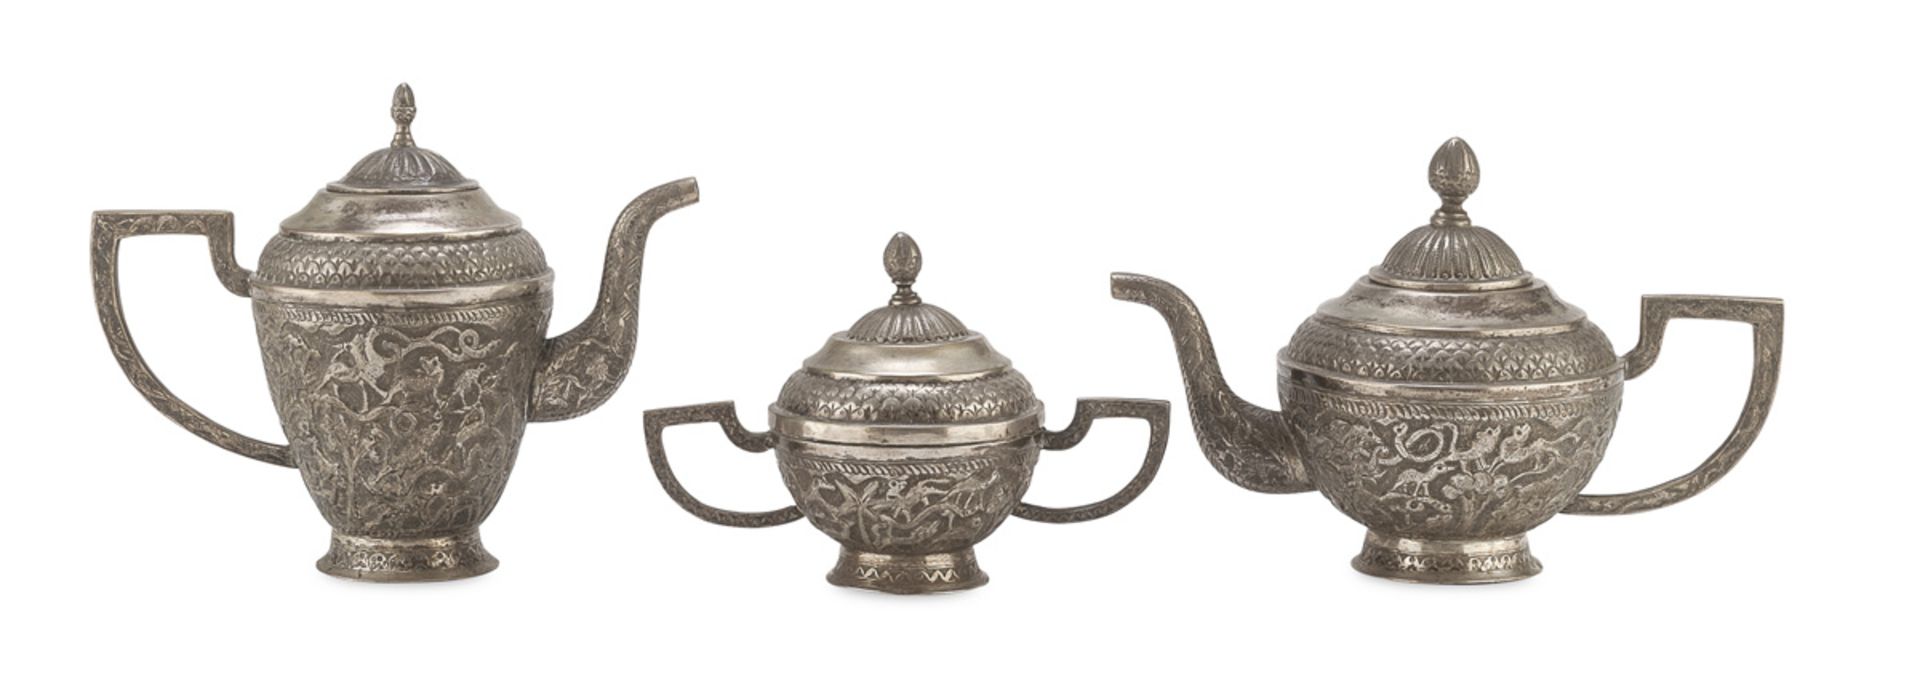 TEA SERVICE IN SILVER PROBABLY PERSIA EARLY 20TH CENTURY